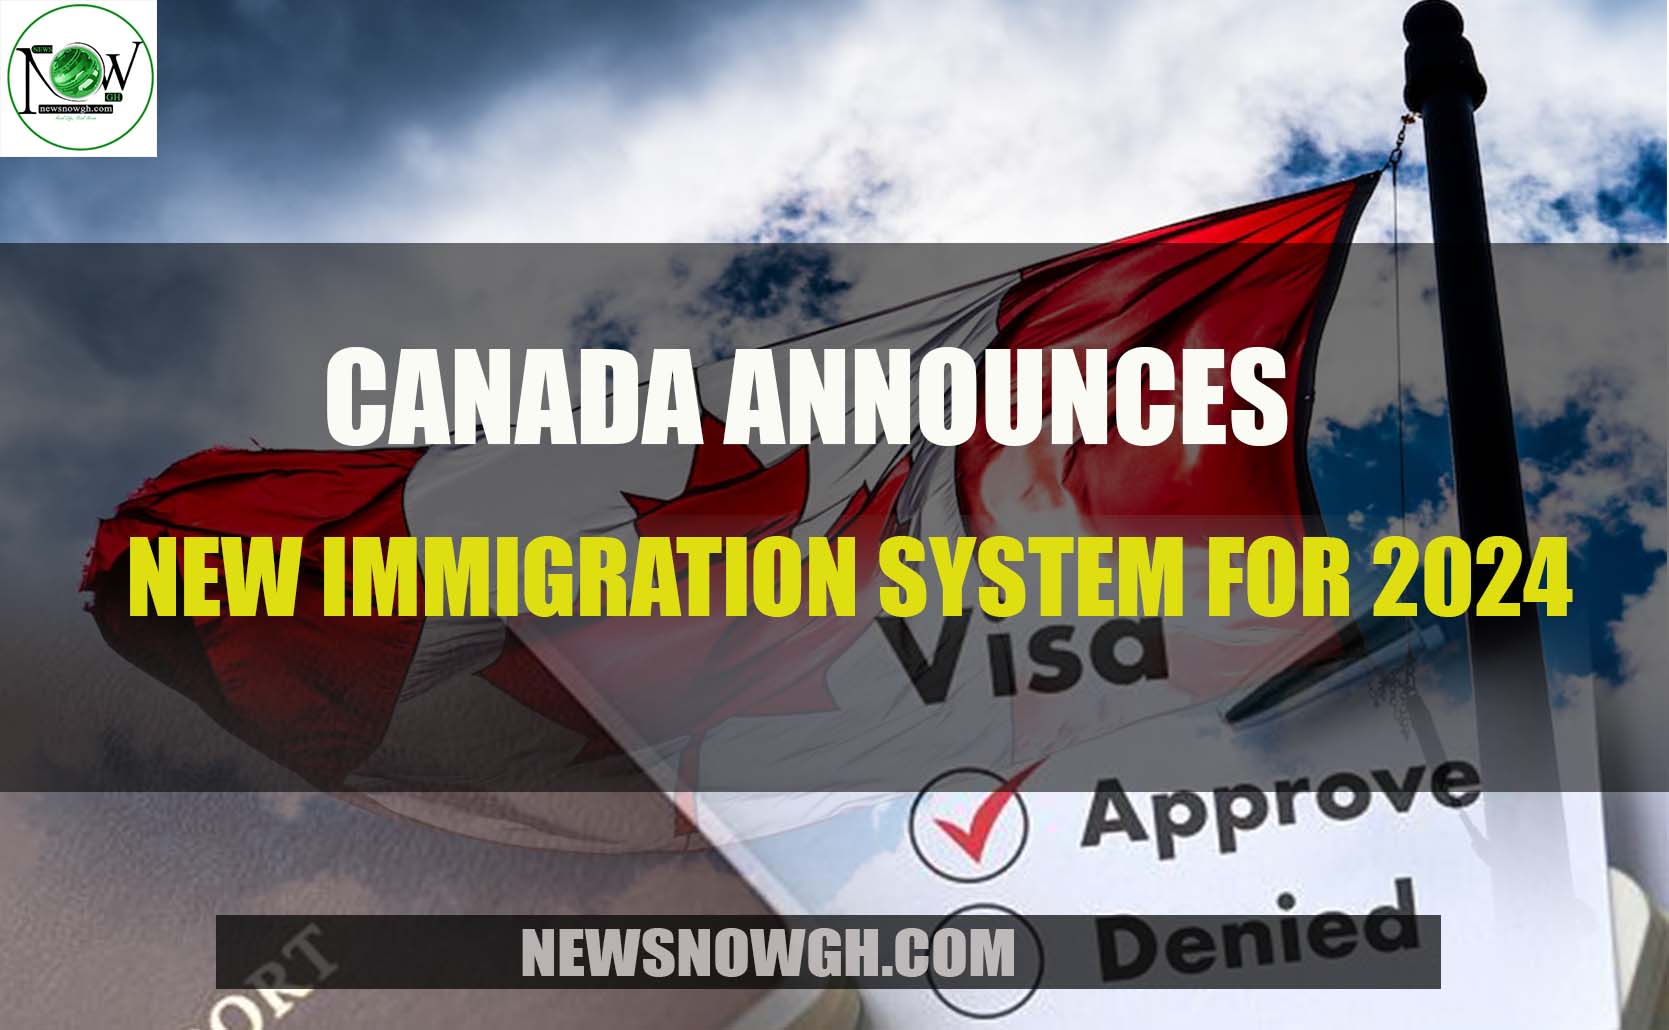 Canada’s 2024 New Immigration System Announced